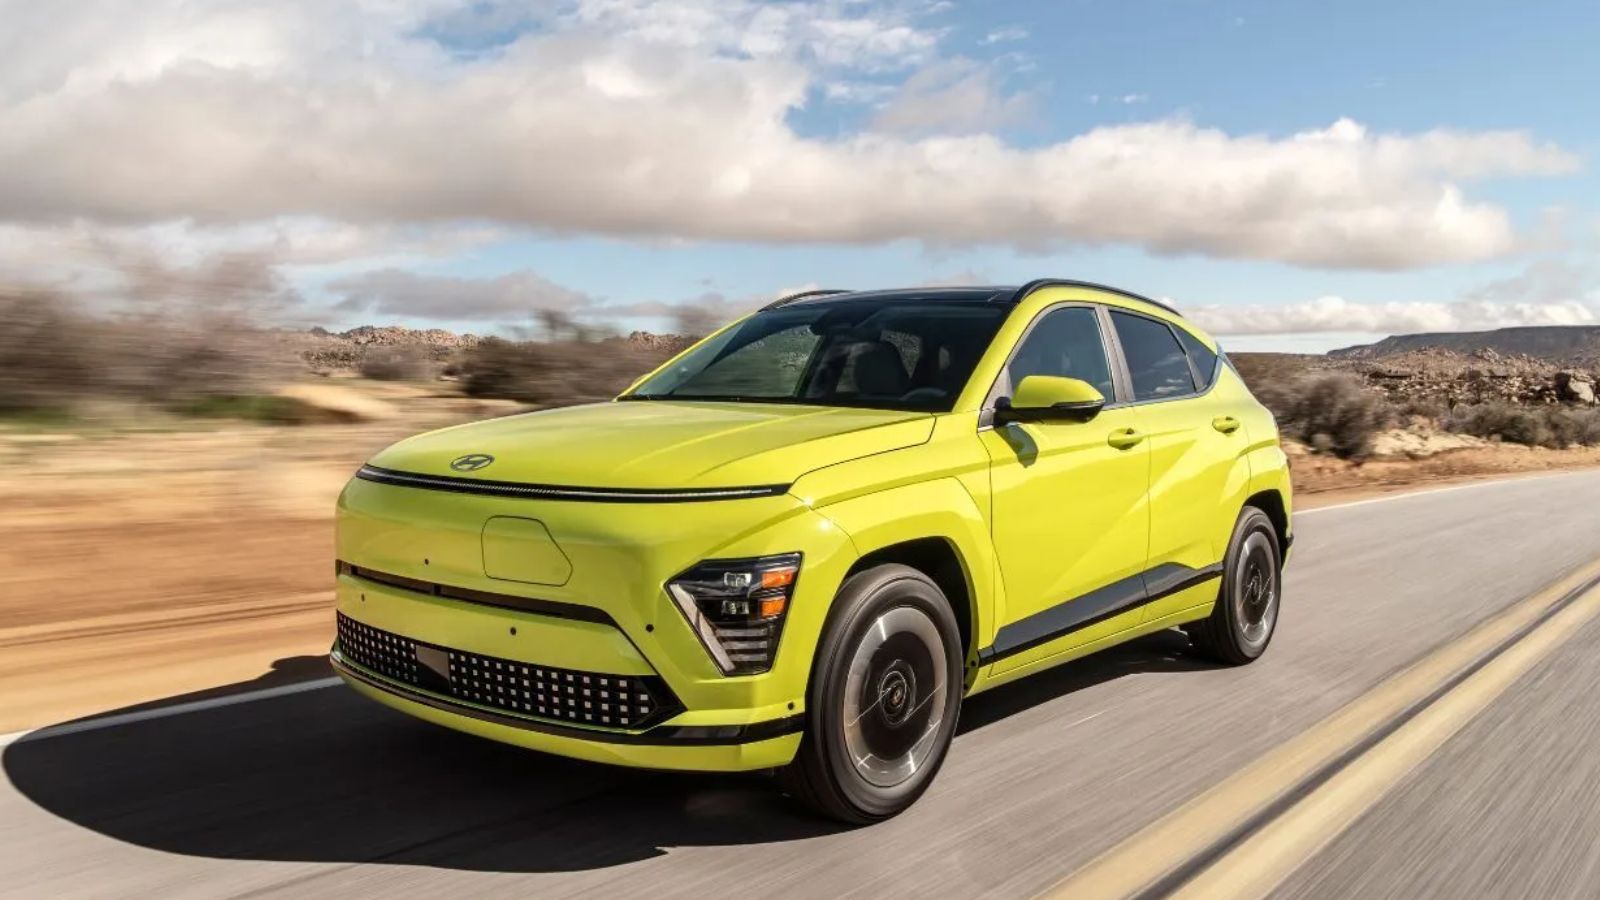 Hyundai Kona Electric: A Compact SUV with a Charged Personality